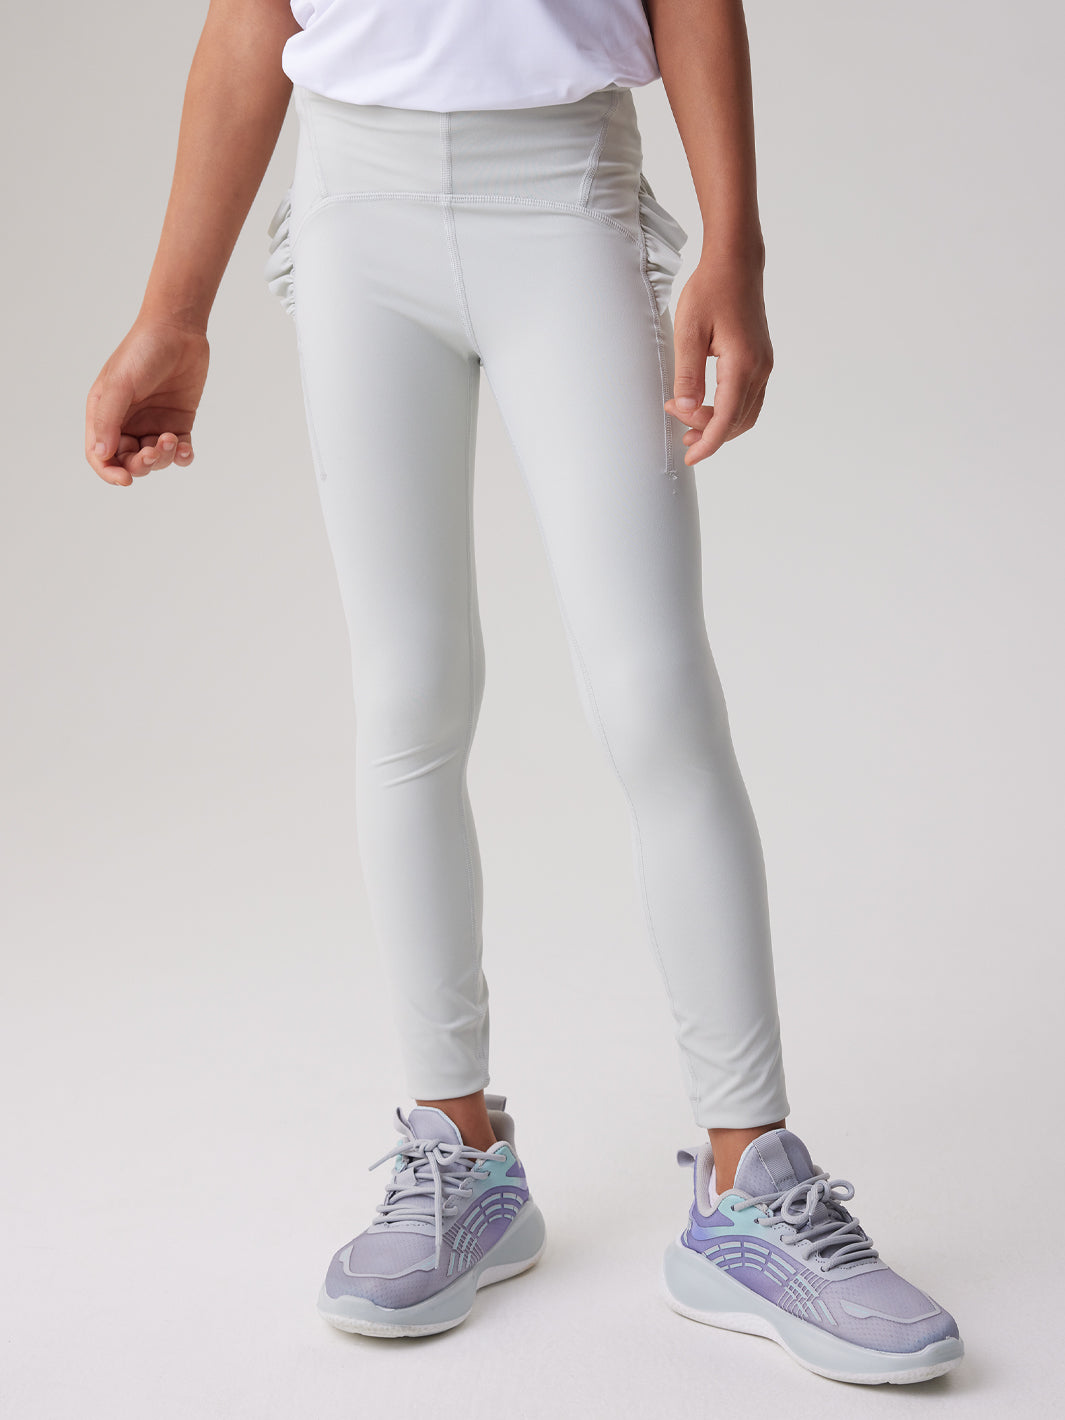 Juliet Ruched Leggings – The Girls In Grey